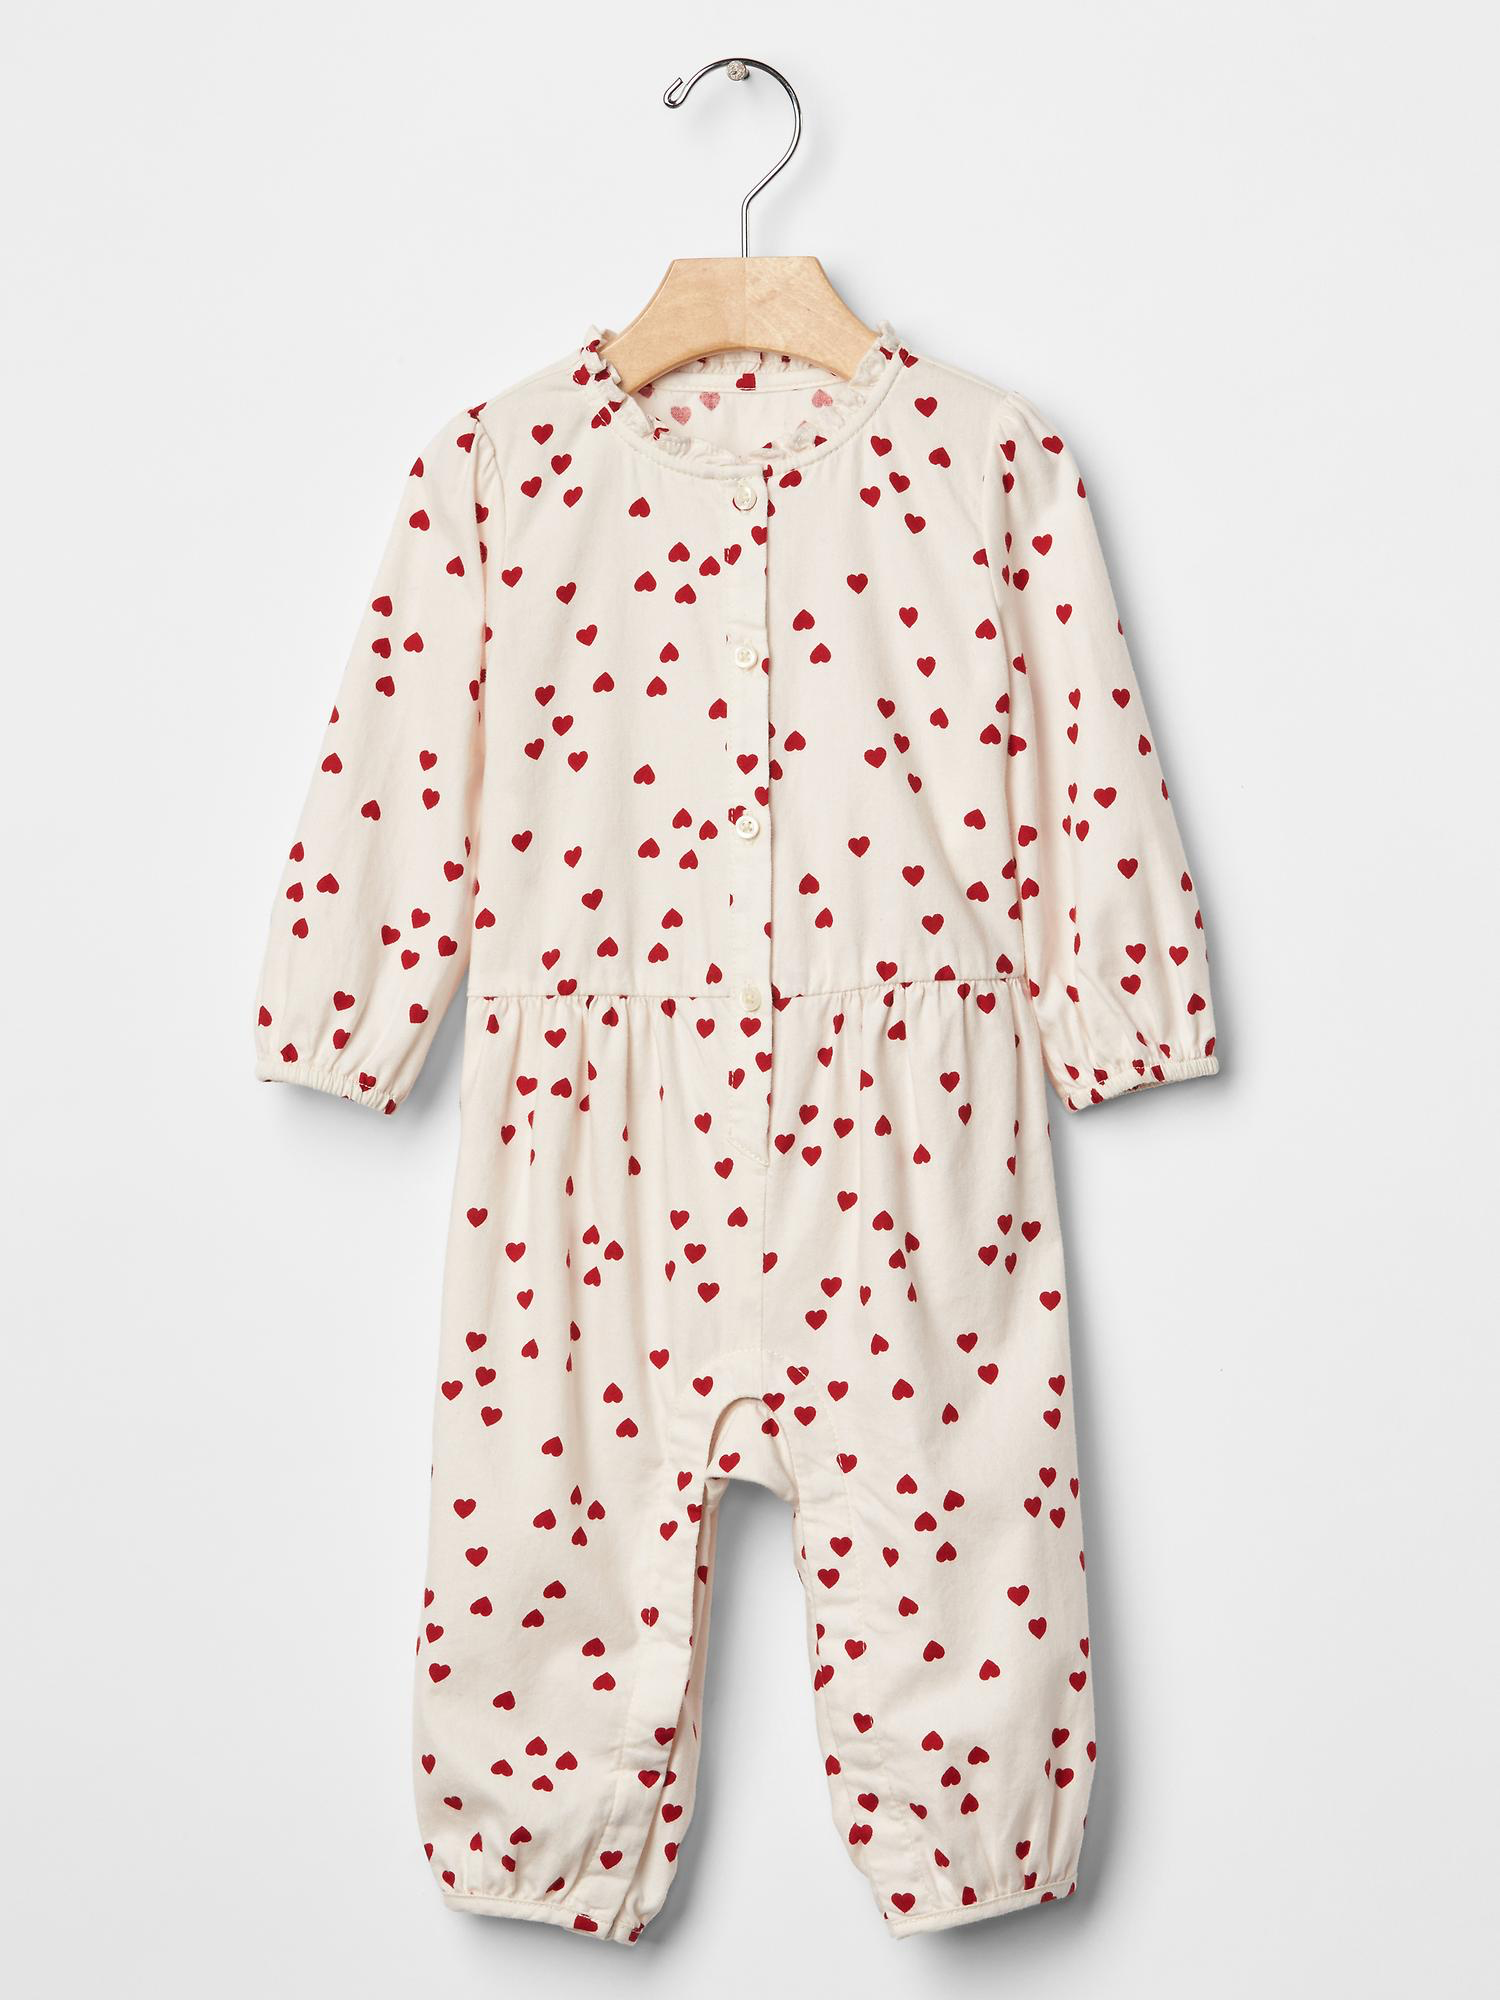 Heart Print One-Piece from Gap